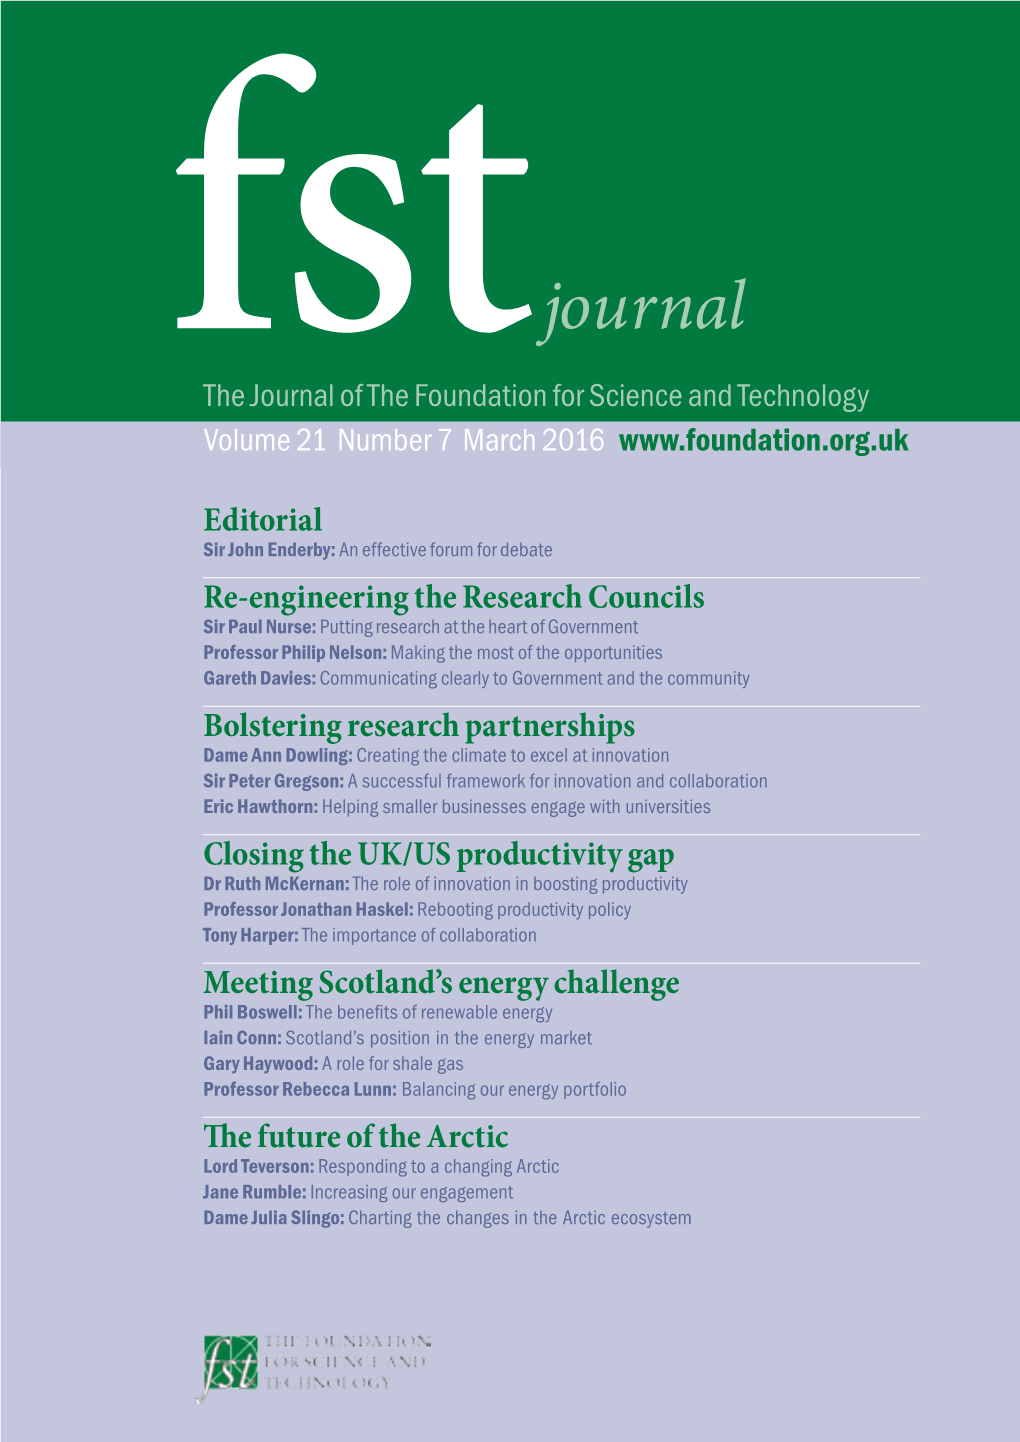 Fstjournal@Foundation.Org.Uk Neither the Foundation Nor the Editor Is Responsible for the Opinions of the Contributors to FST Journal